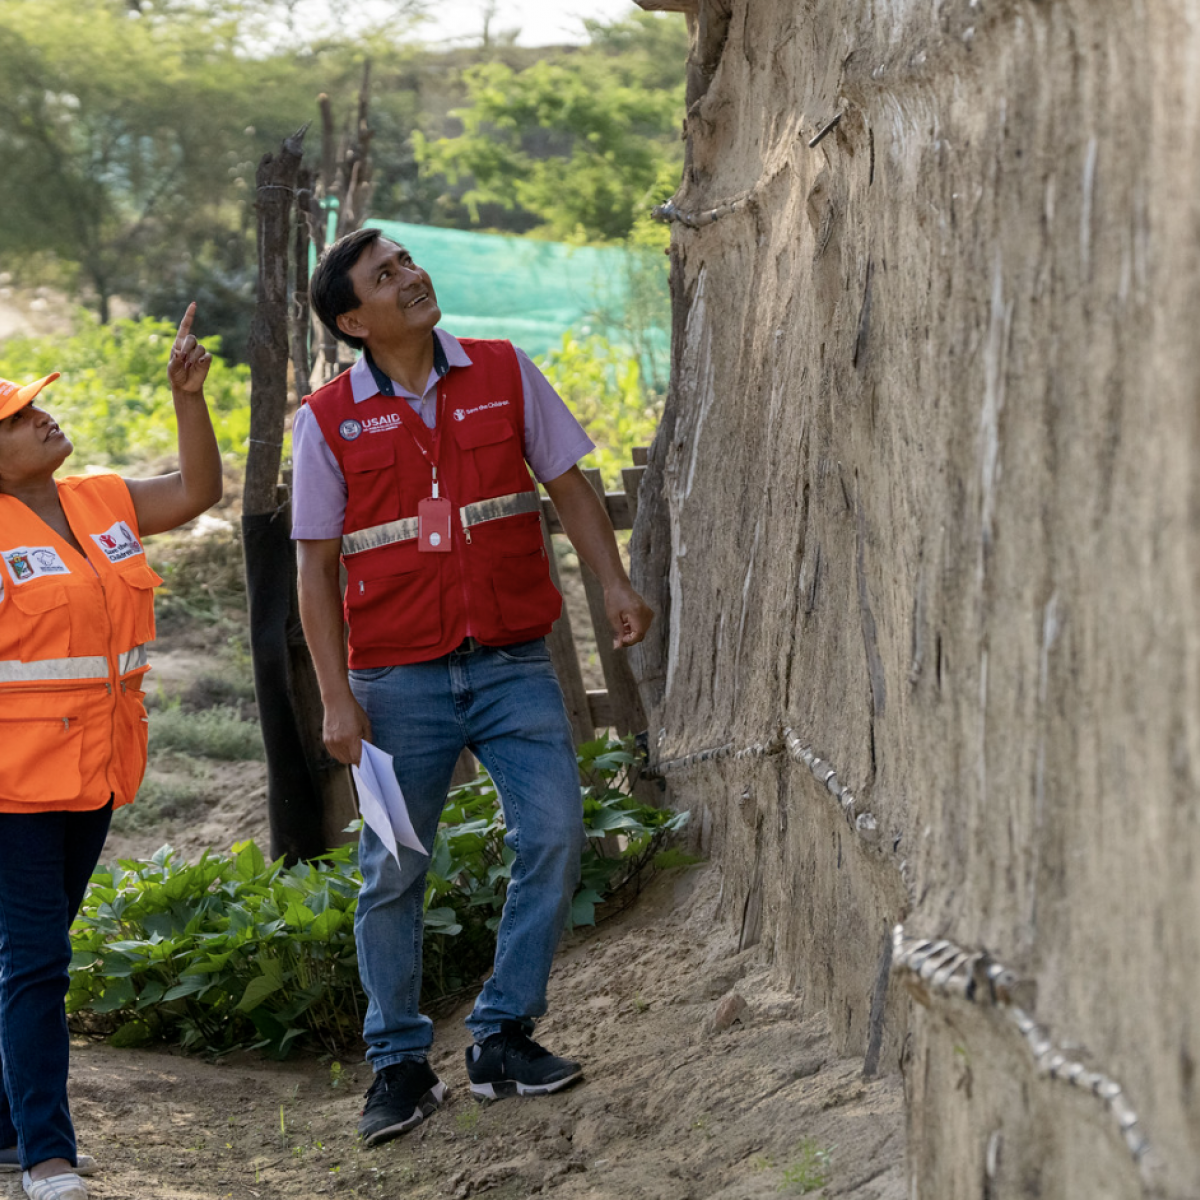 Veronica Rodriguez is a member of the Disaster Risk Management Committee that receives support and capacity building from USAID and Save the Children to be better prepared for disaster response 